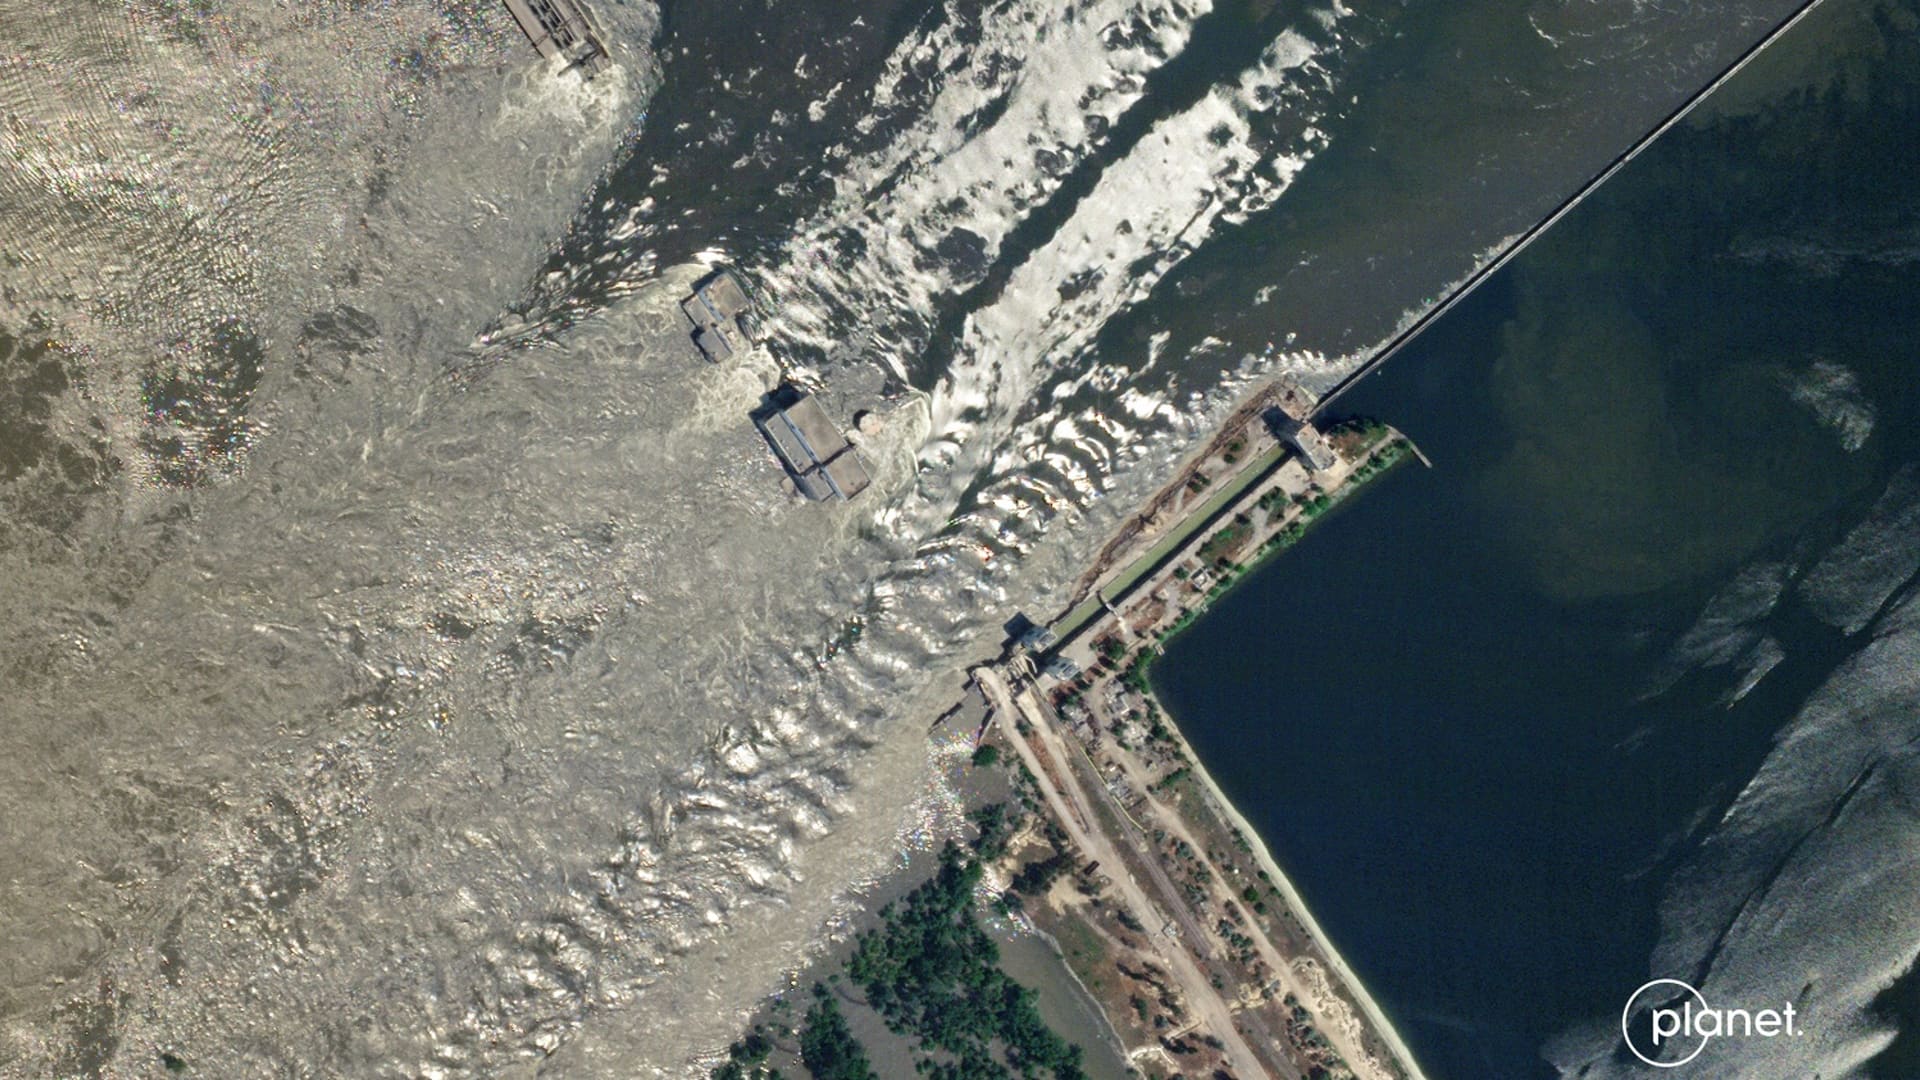 A satellite image captured by a SkySat shows the breached Kakhovka dam in Ukraine on June 6, 2023.